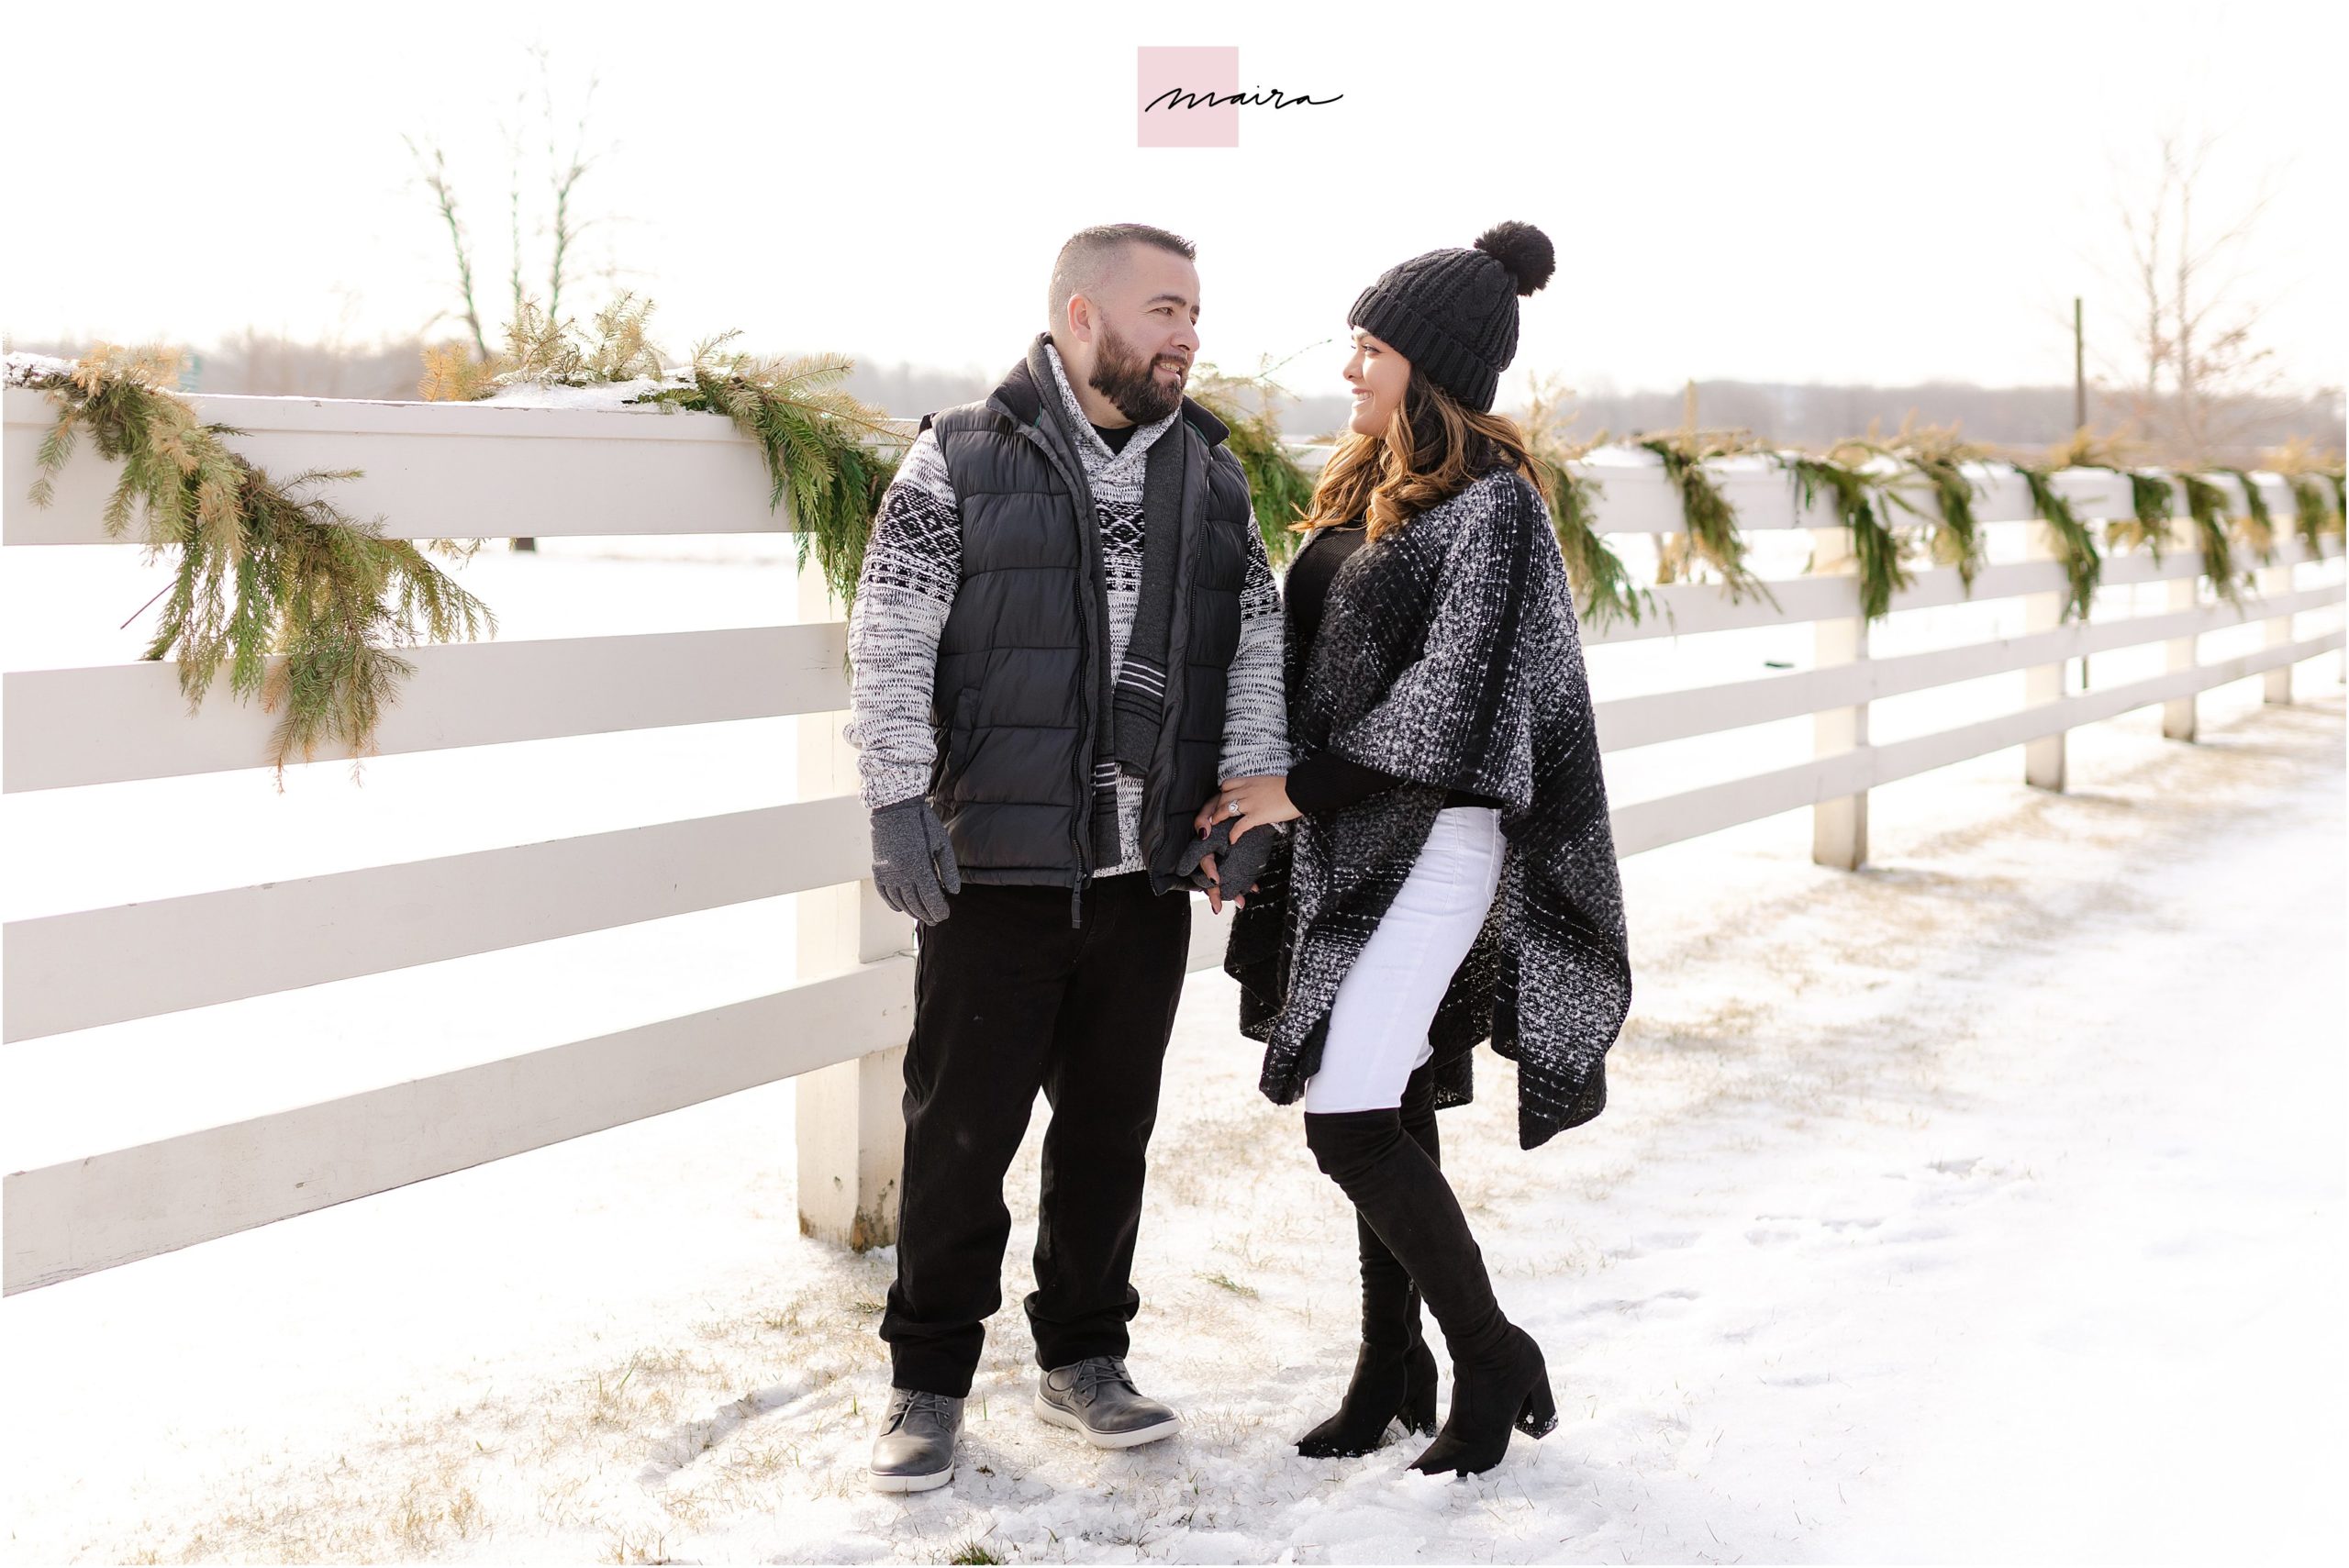 Cute Engagement Session, cute couple, Got engaged on Christmas 2020, Winter engagement photos shoot, Snow, Christmas themed engagement photos